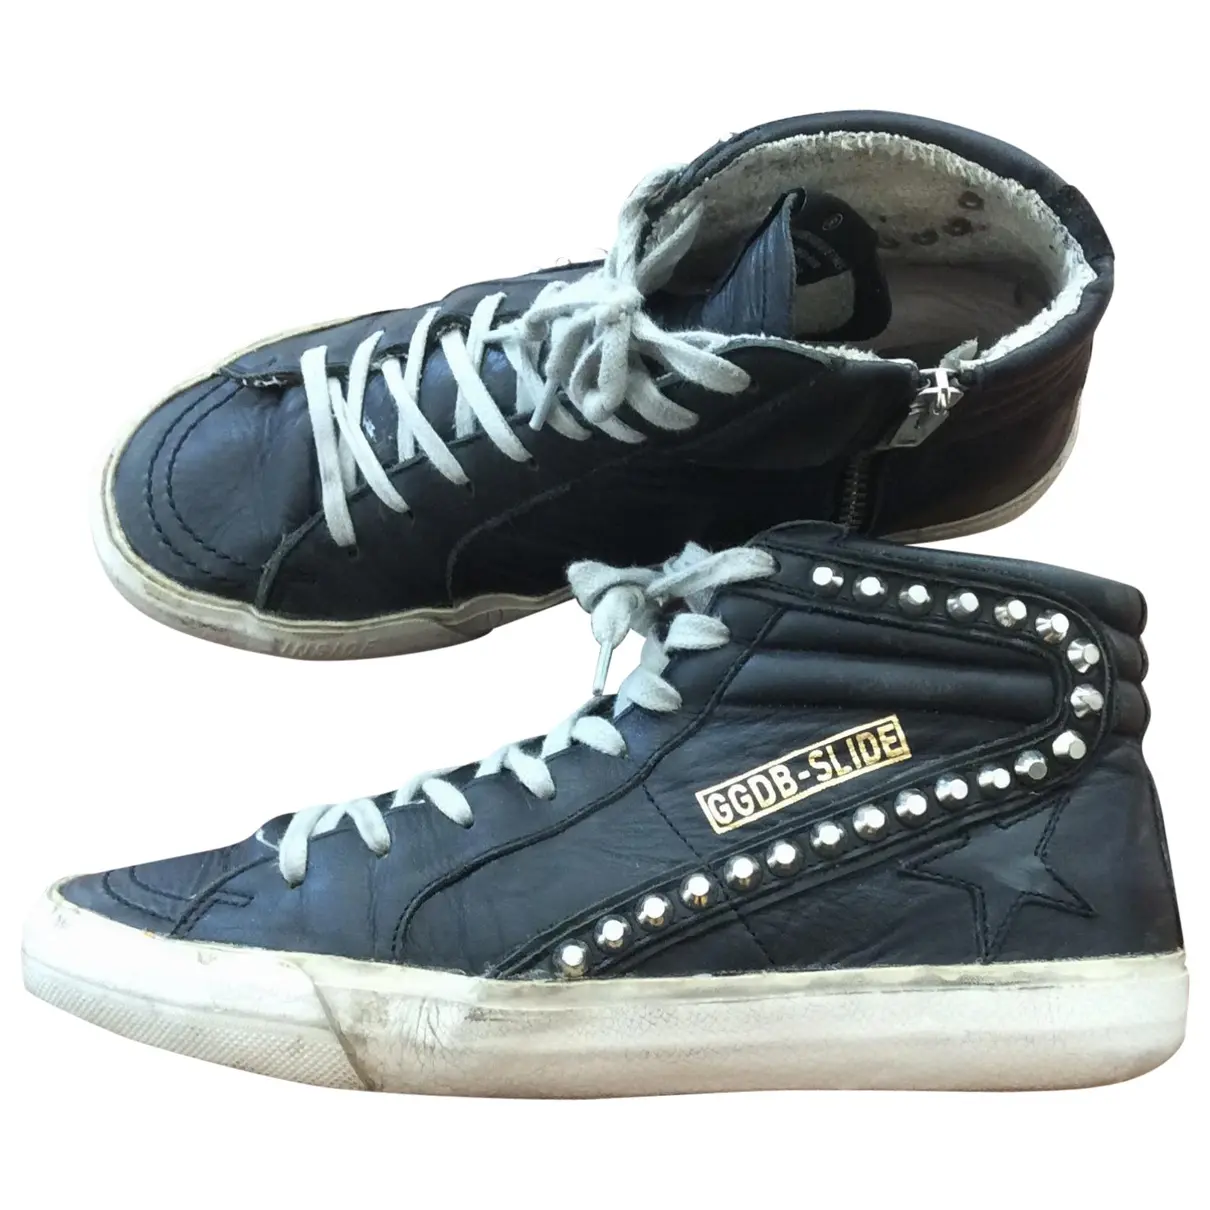 LEATHER TRAINERS Golden Goose